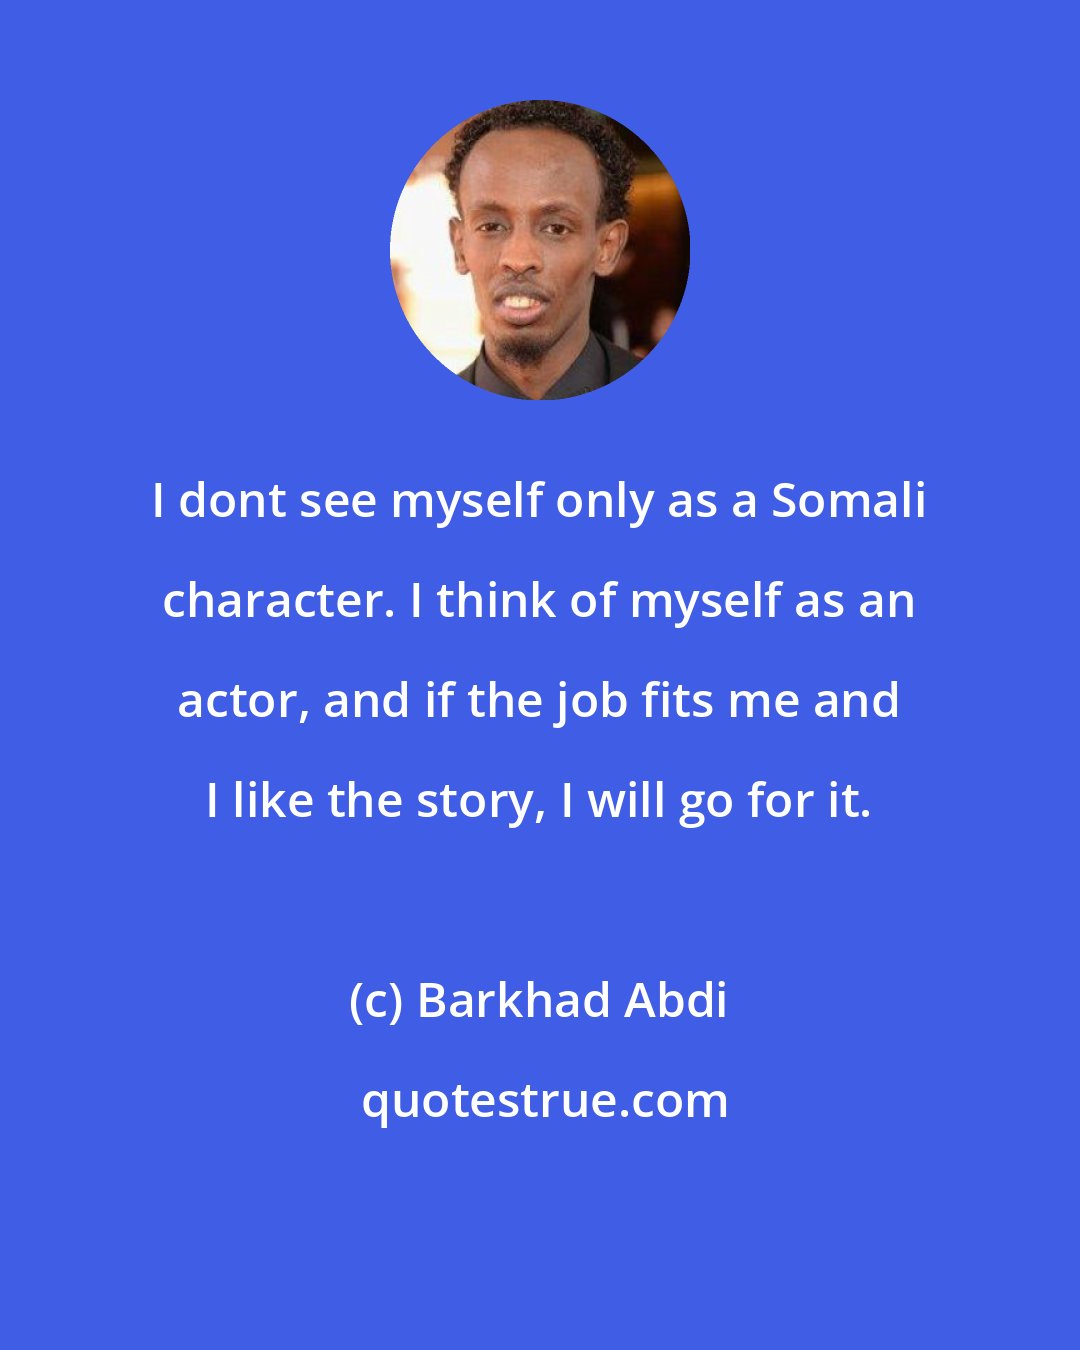 Barkhad Abdi: I dont see myself only as a Somali character. I think of myself as an actor, and if the job fits me and I like the story, I will go for it.